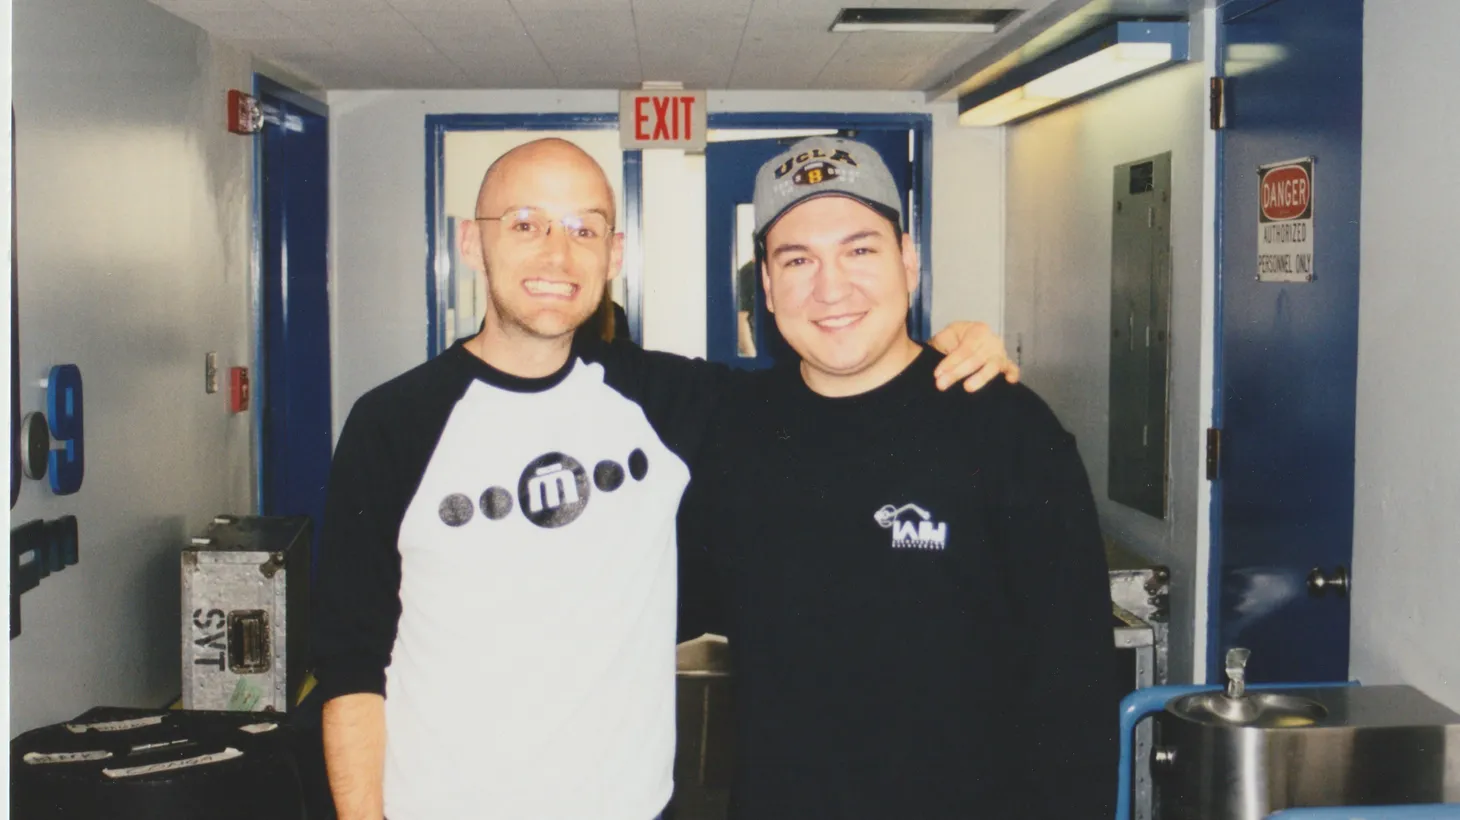 Moby and Raul Campos at KCRW on June 11, 1999.